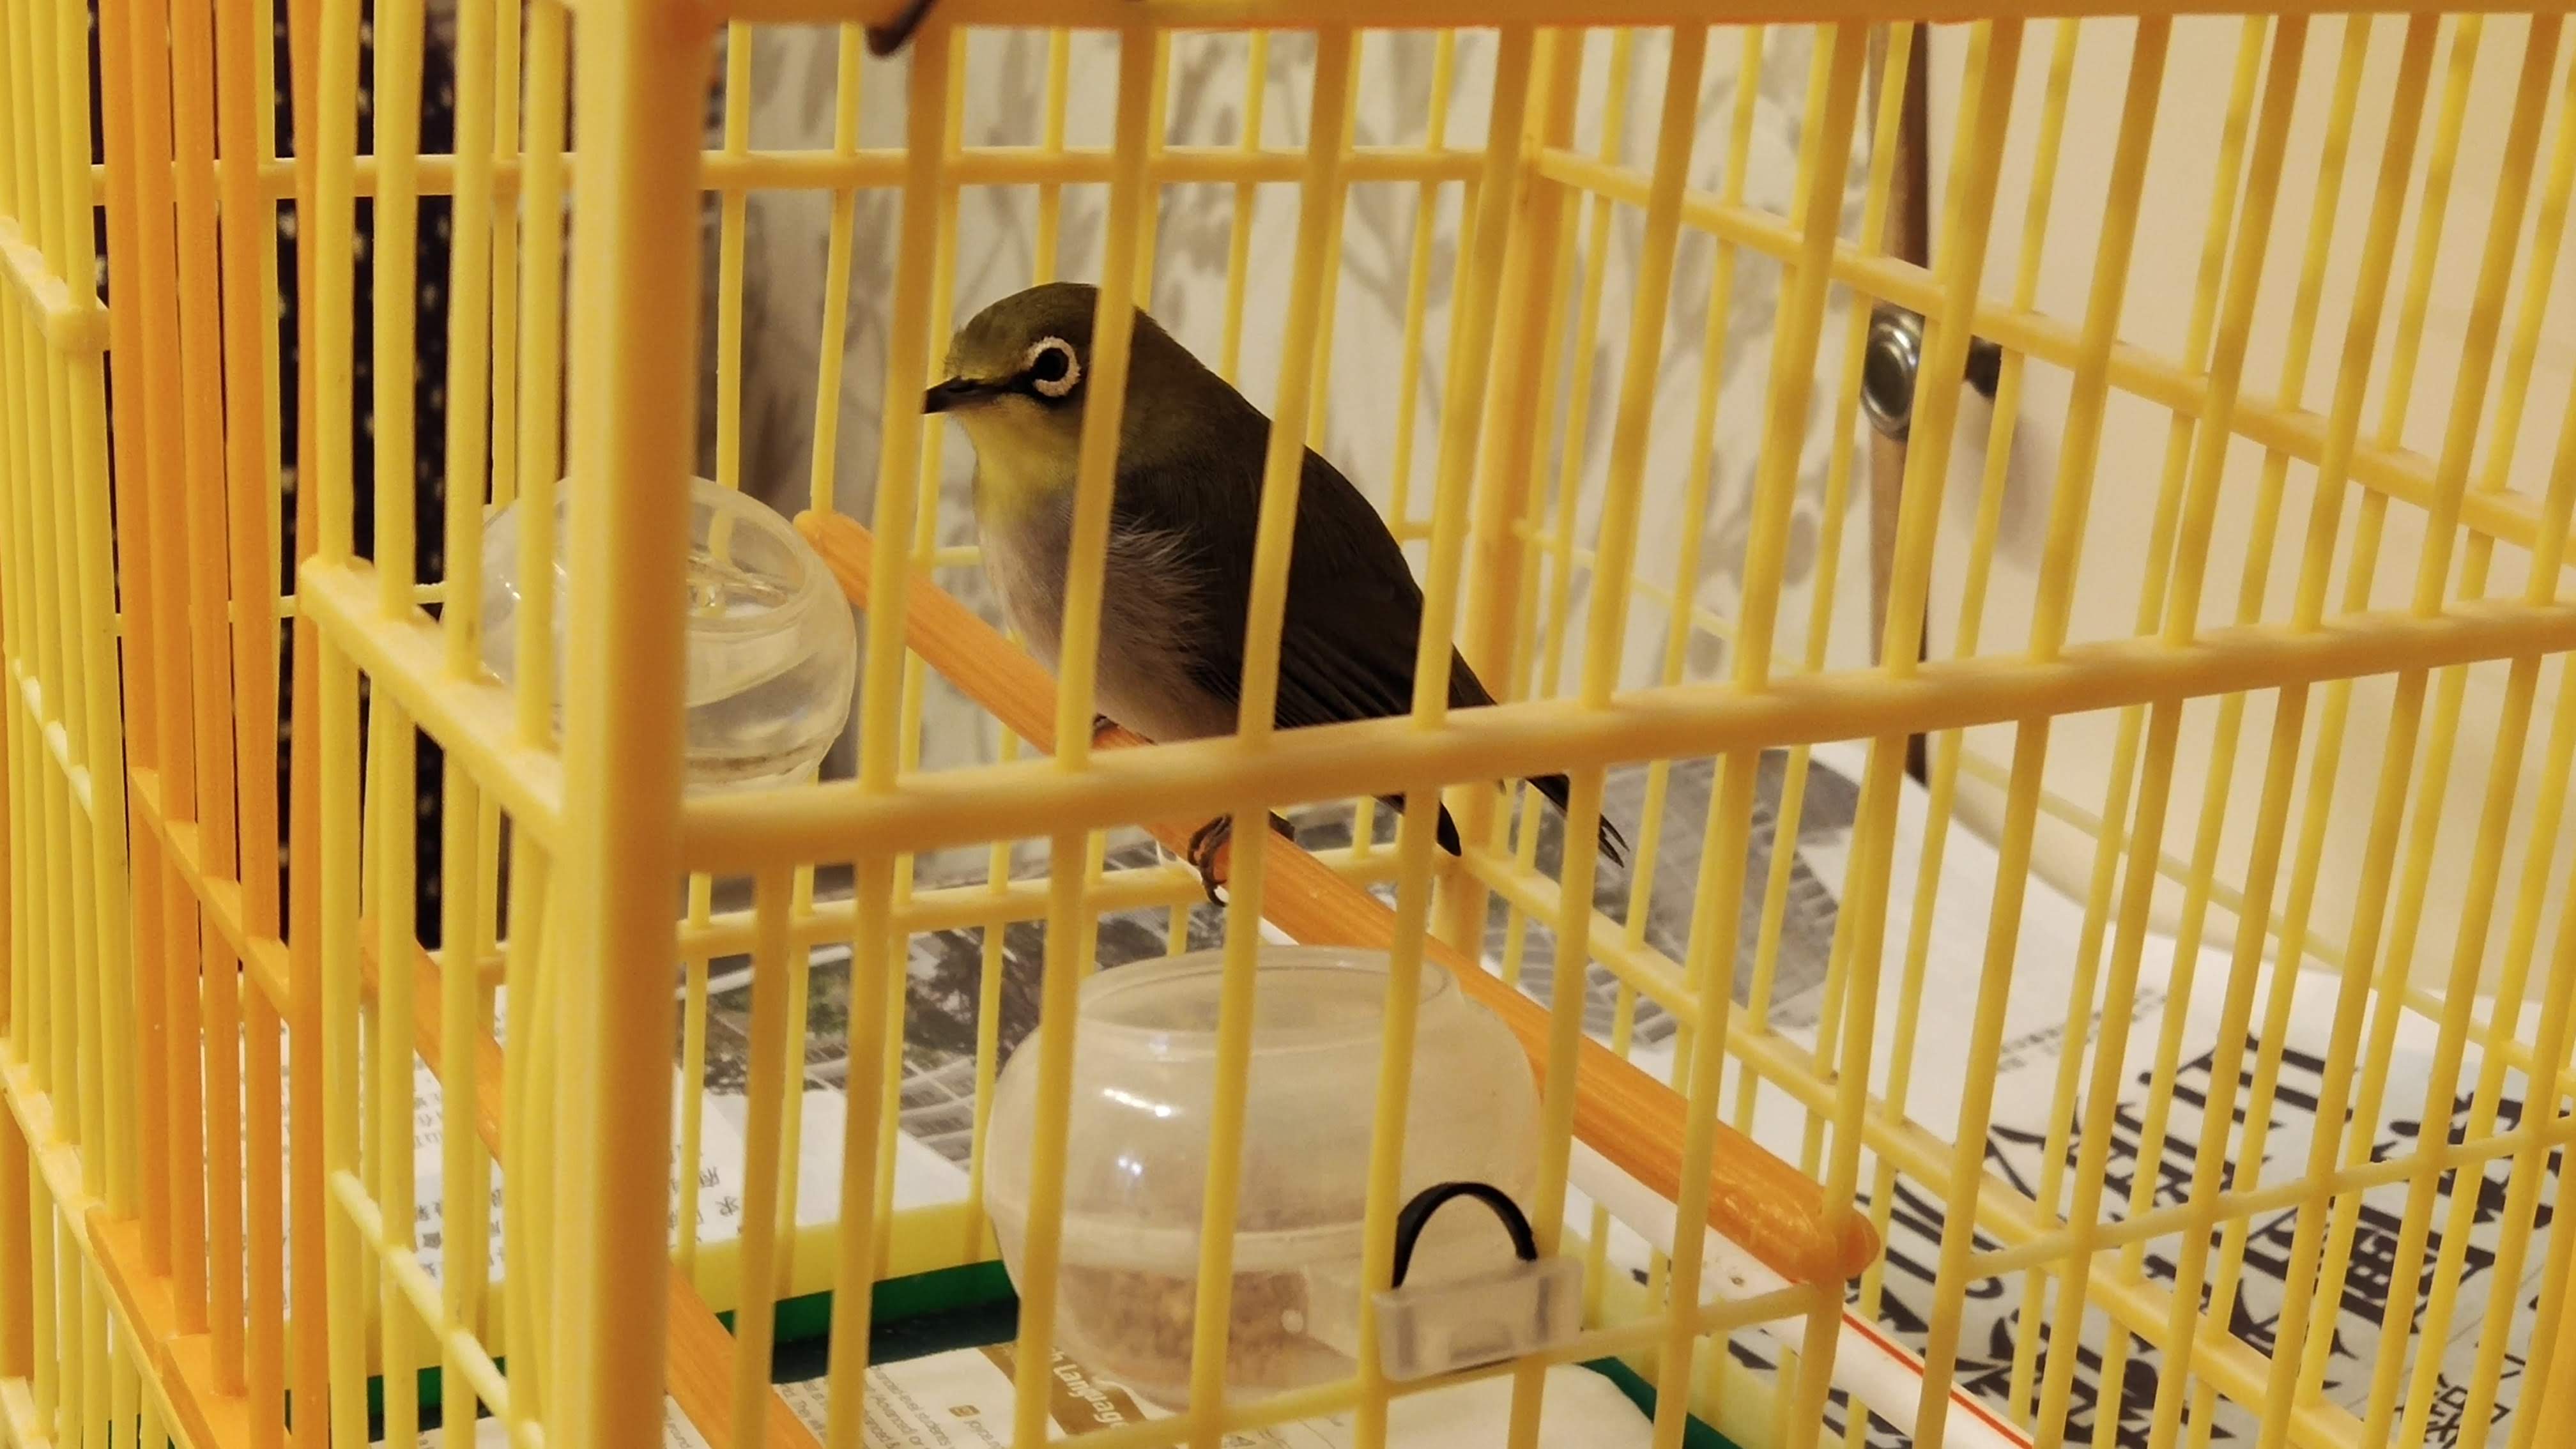 Birdie Emerald is Frank the tour guide's pet. It is living in the cage, not in the net.